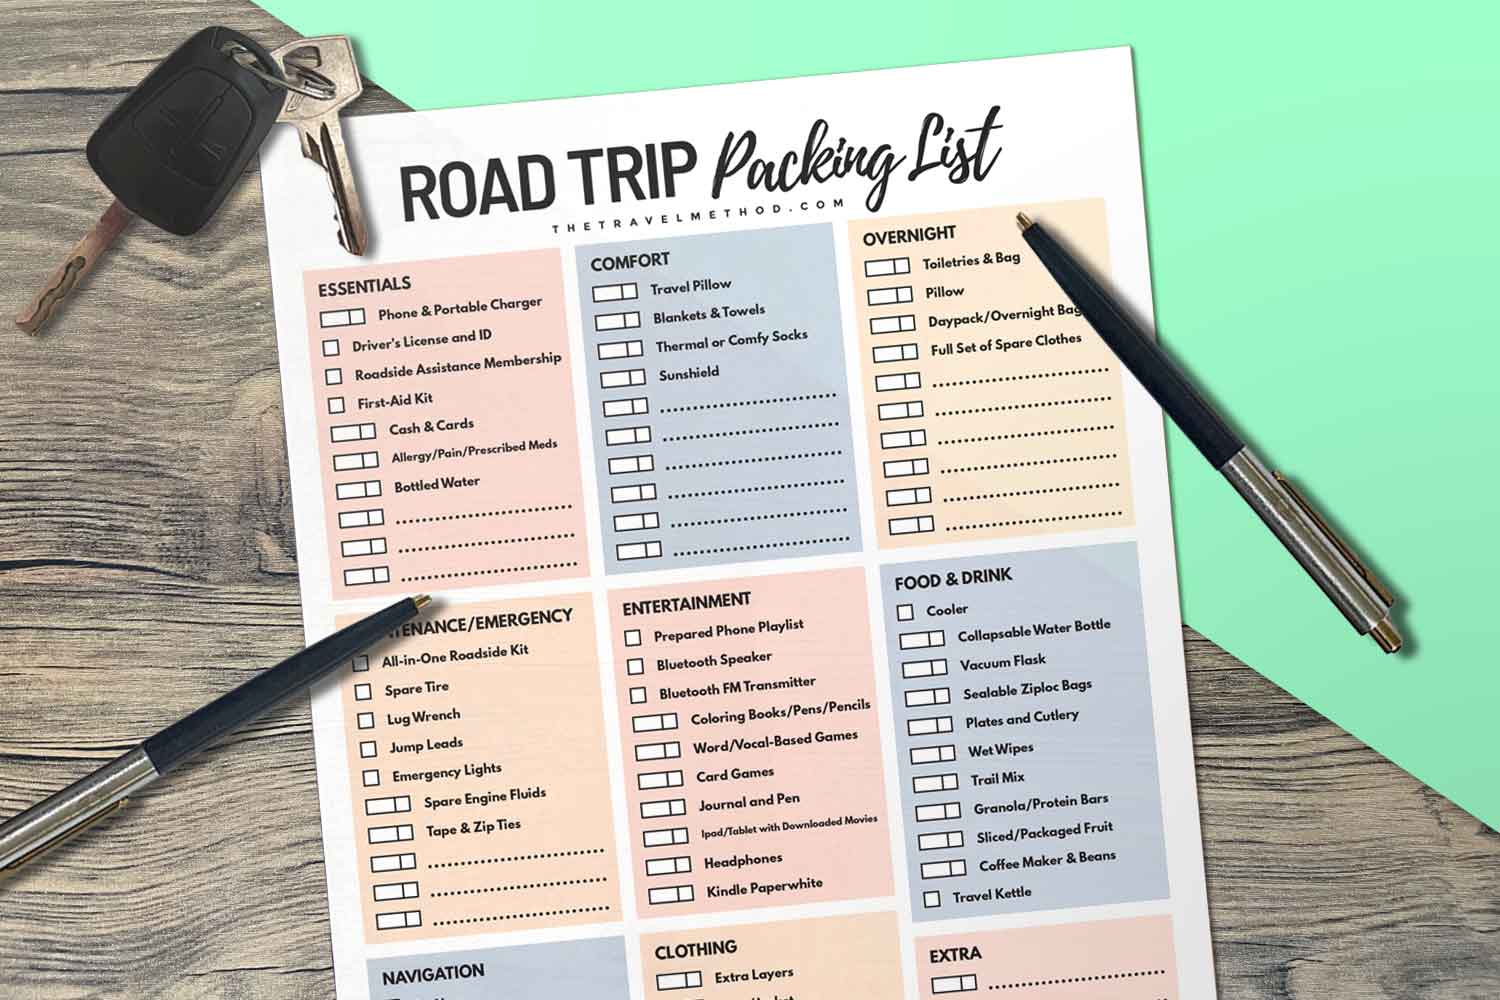 37 BEST Road Trip Essentials You Need to Pack in 2023